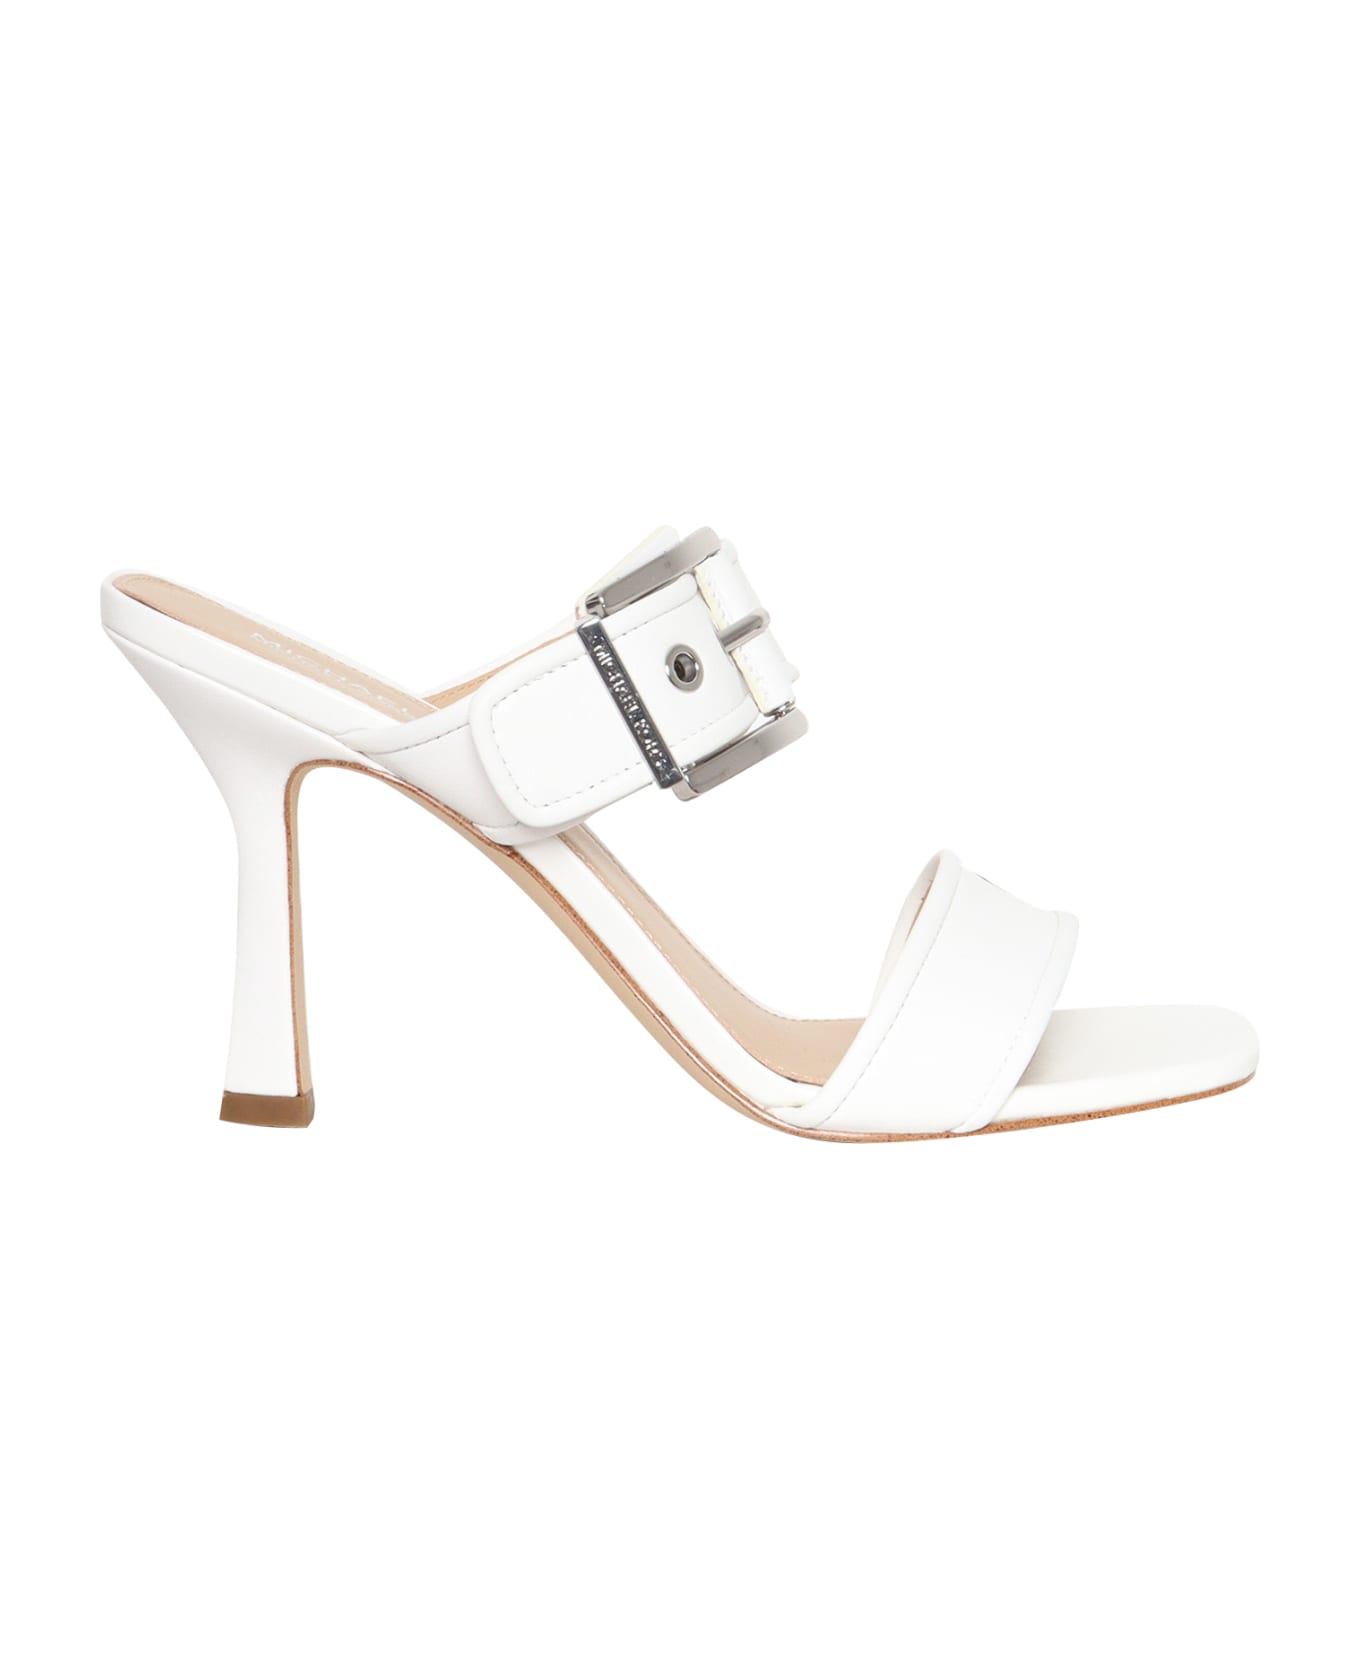 Michael Kors Colby Leather Sandals - WHITE